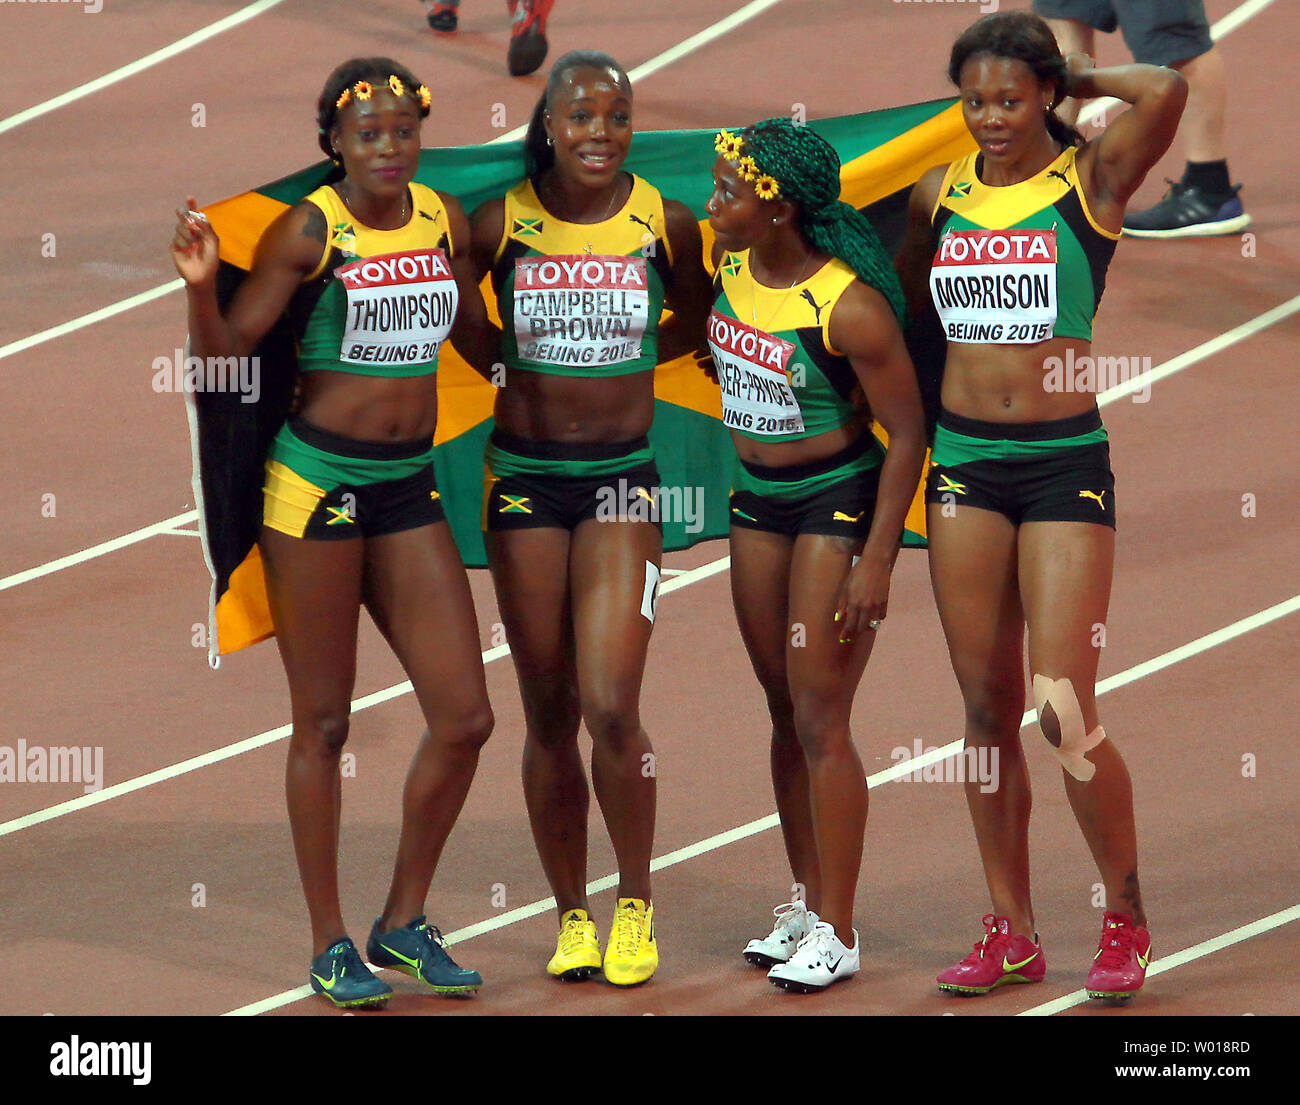 (L-R) Jamaica's Elaine Thompson, Veronica Brown, Shelly-Ann Fraser-Pryce and Natasha Morrison pose with the Jamaican flag after winning the 4x100 meters women's relay final at the IAAF World Championships being hosted by Beijing on August 29, 2015.  Jamaica won with a time of 41.07 seconds, followed by USA (41.68) and Trinidad and Tobago (42.03) in third.     Photo by Stephen Shaver/UPI Stock Photo